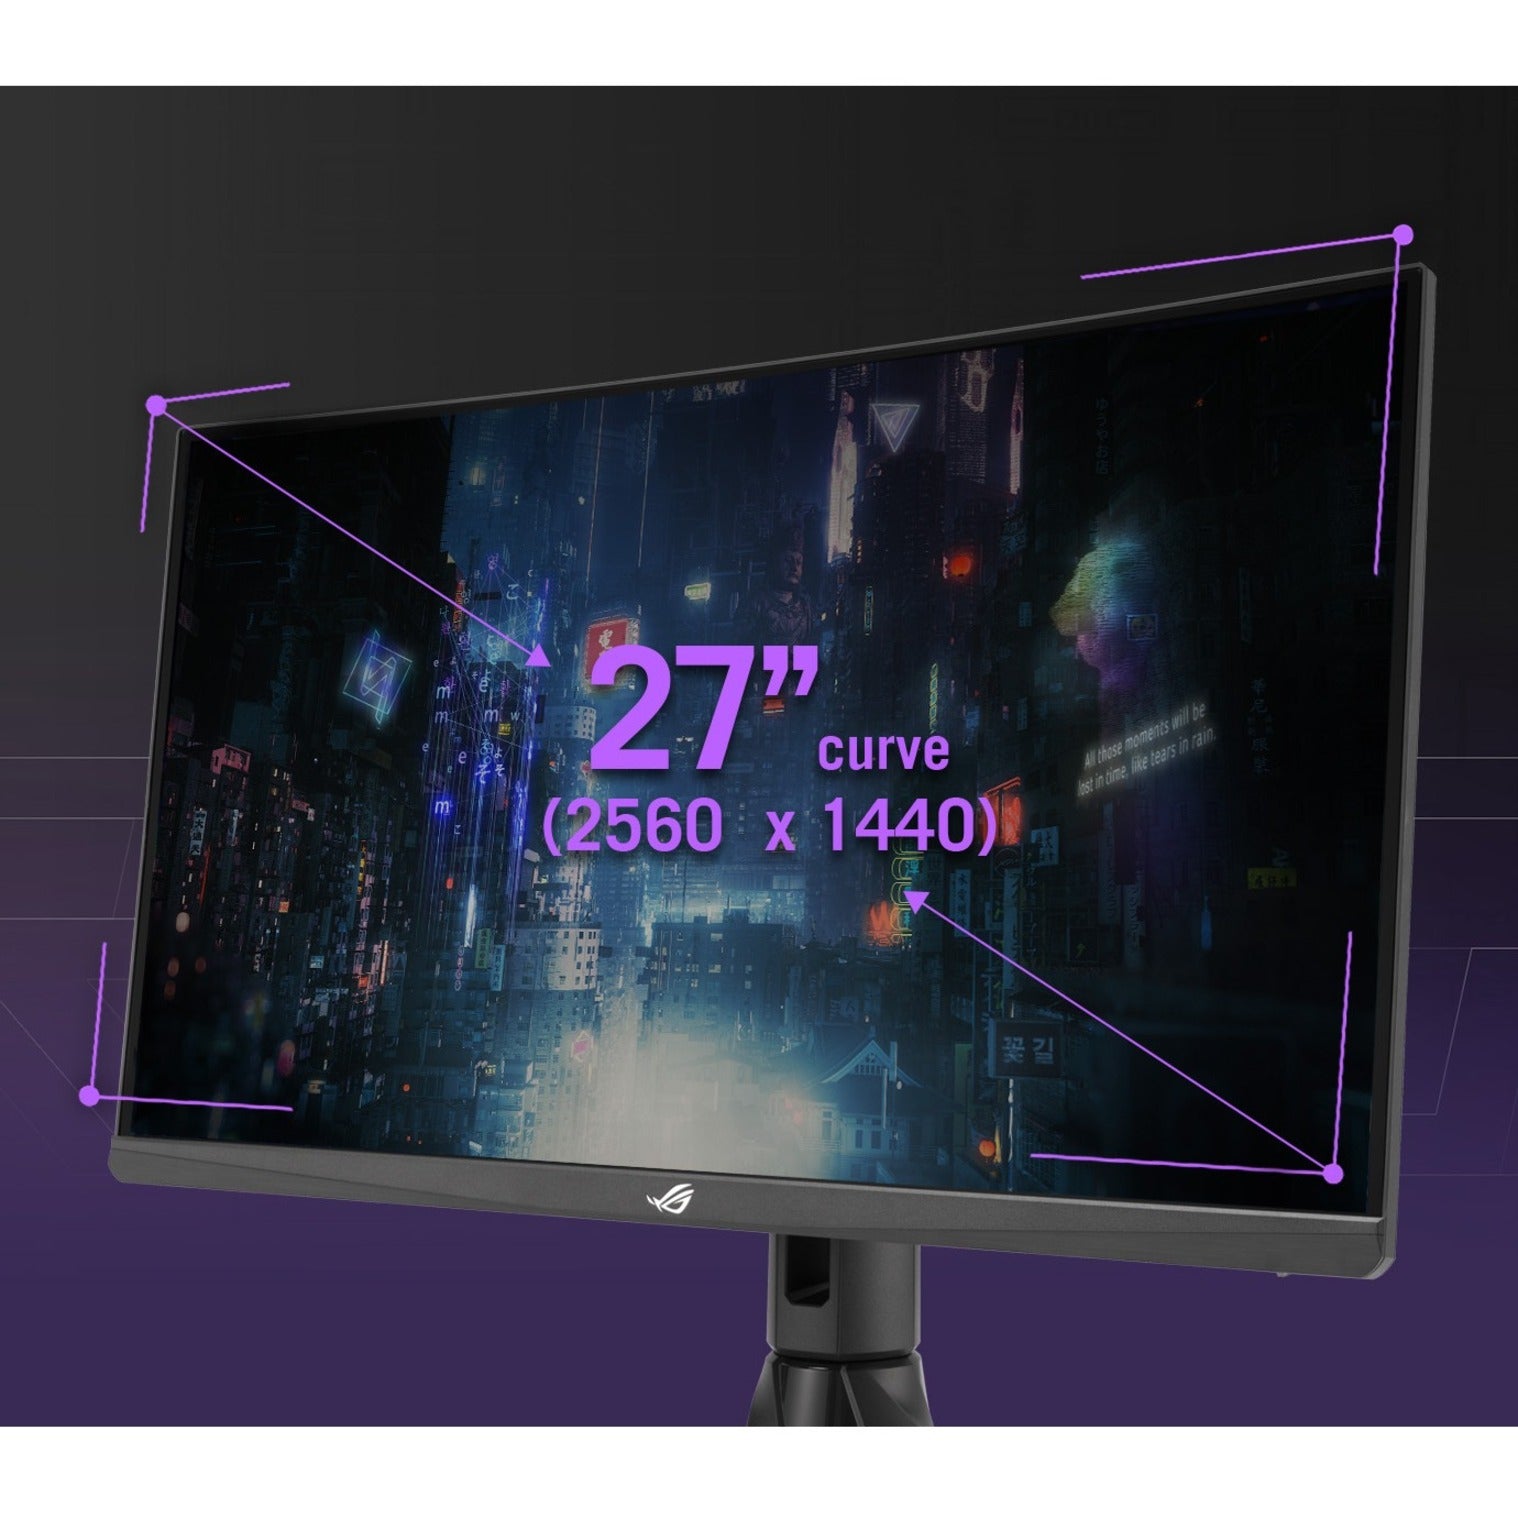 Best 1440p 240Hz Monitors You Can Buy - History-Computer